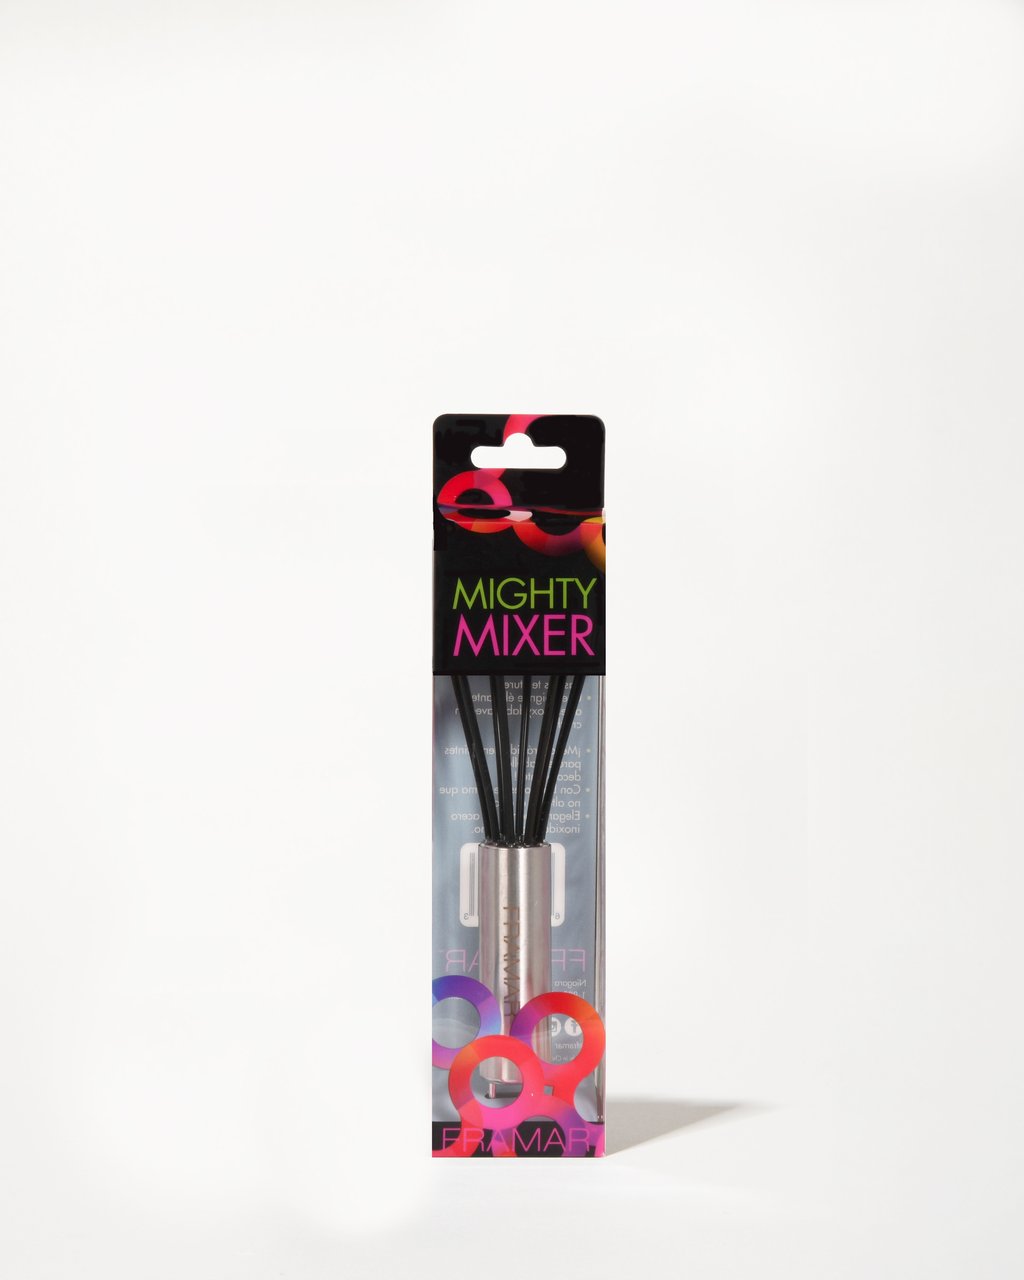 Framar Color Whisk - Mighty Mixer - Creata Beauty - Professional Beauty Products